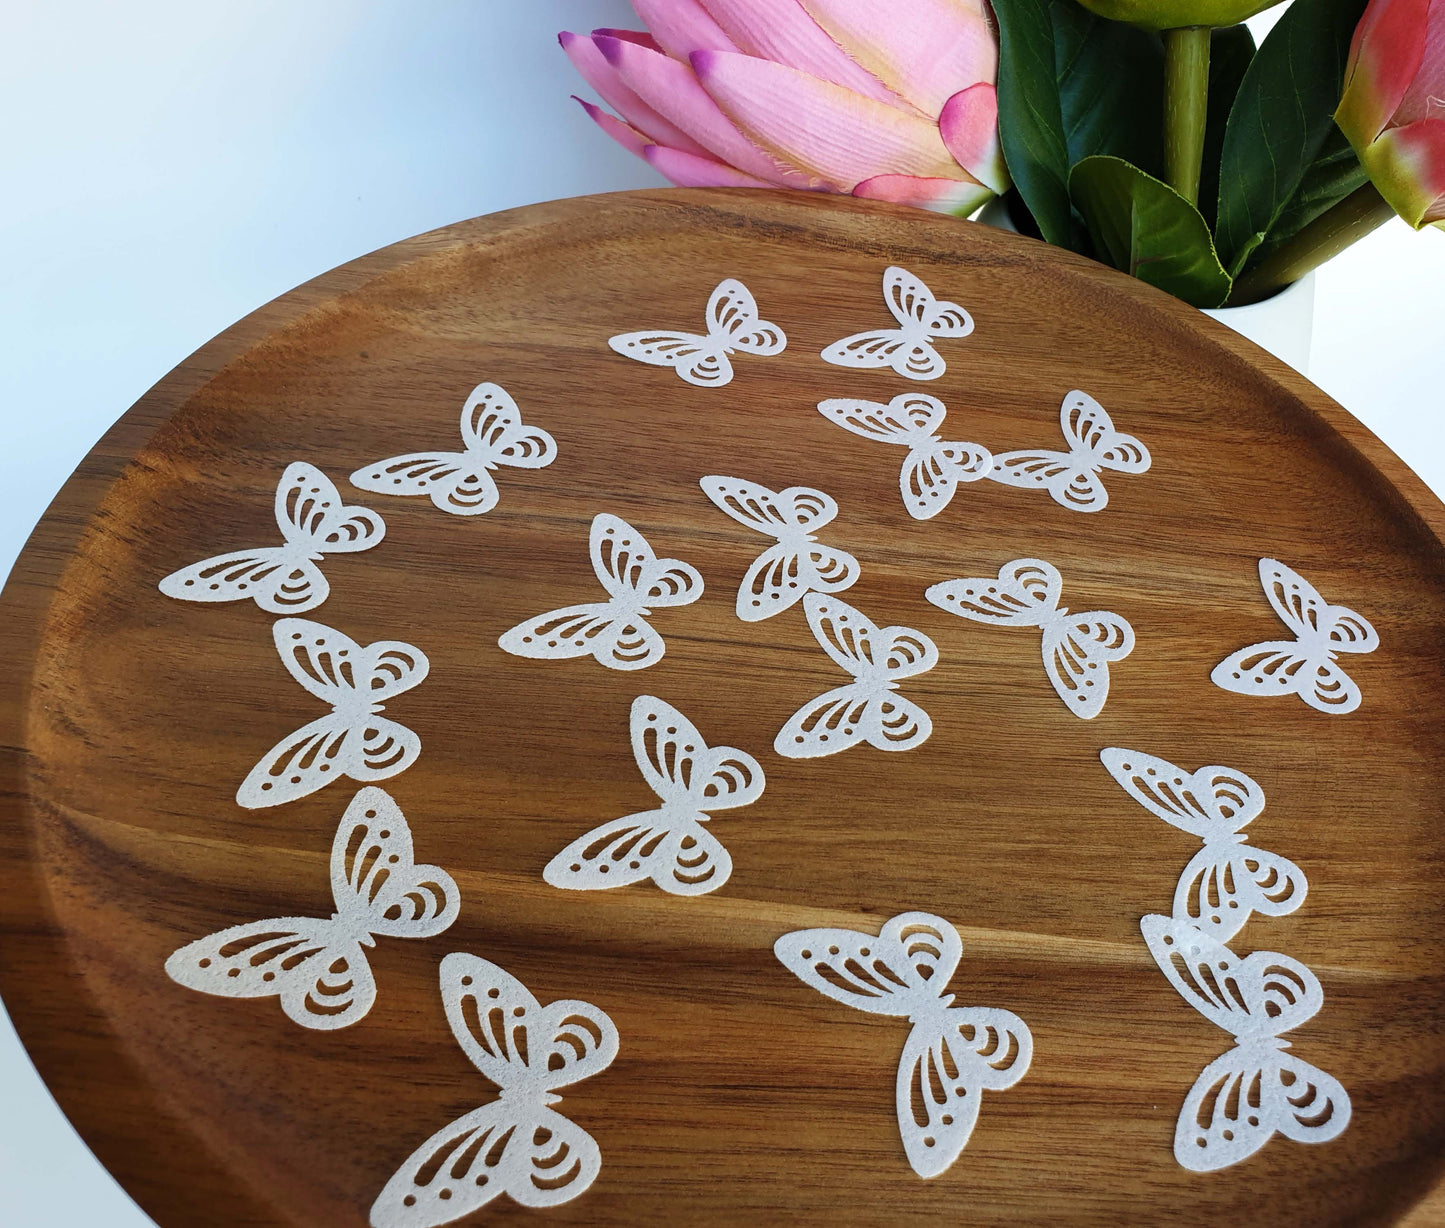 These wafer butterflies are simply magnificent and will make ordinary desserts extraordinary.  The pack contains 24 wafer butterflies in white colour.   These butterflies are precut and ready to use. Each butterfly has a wingspan of approximately 1.8 inches (4.5cm).